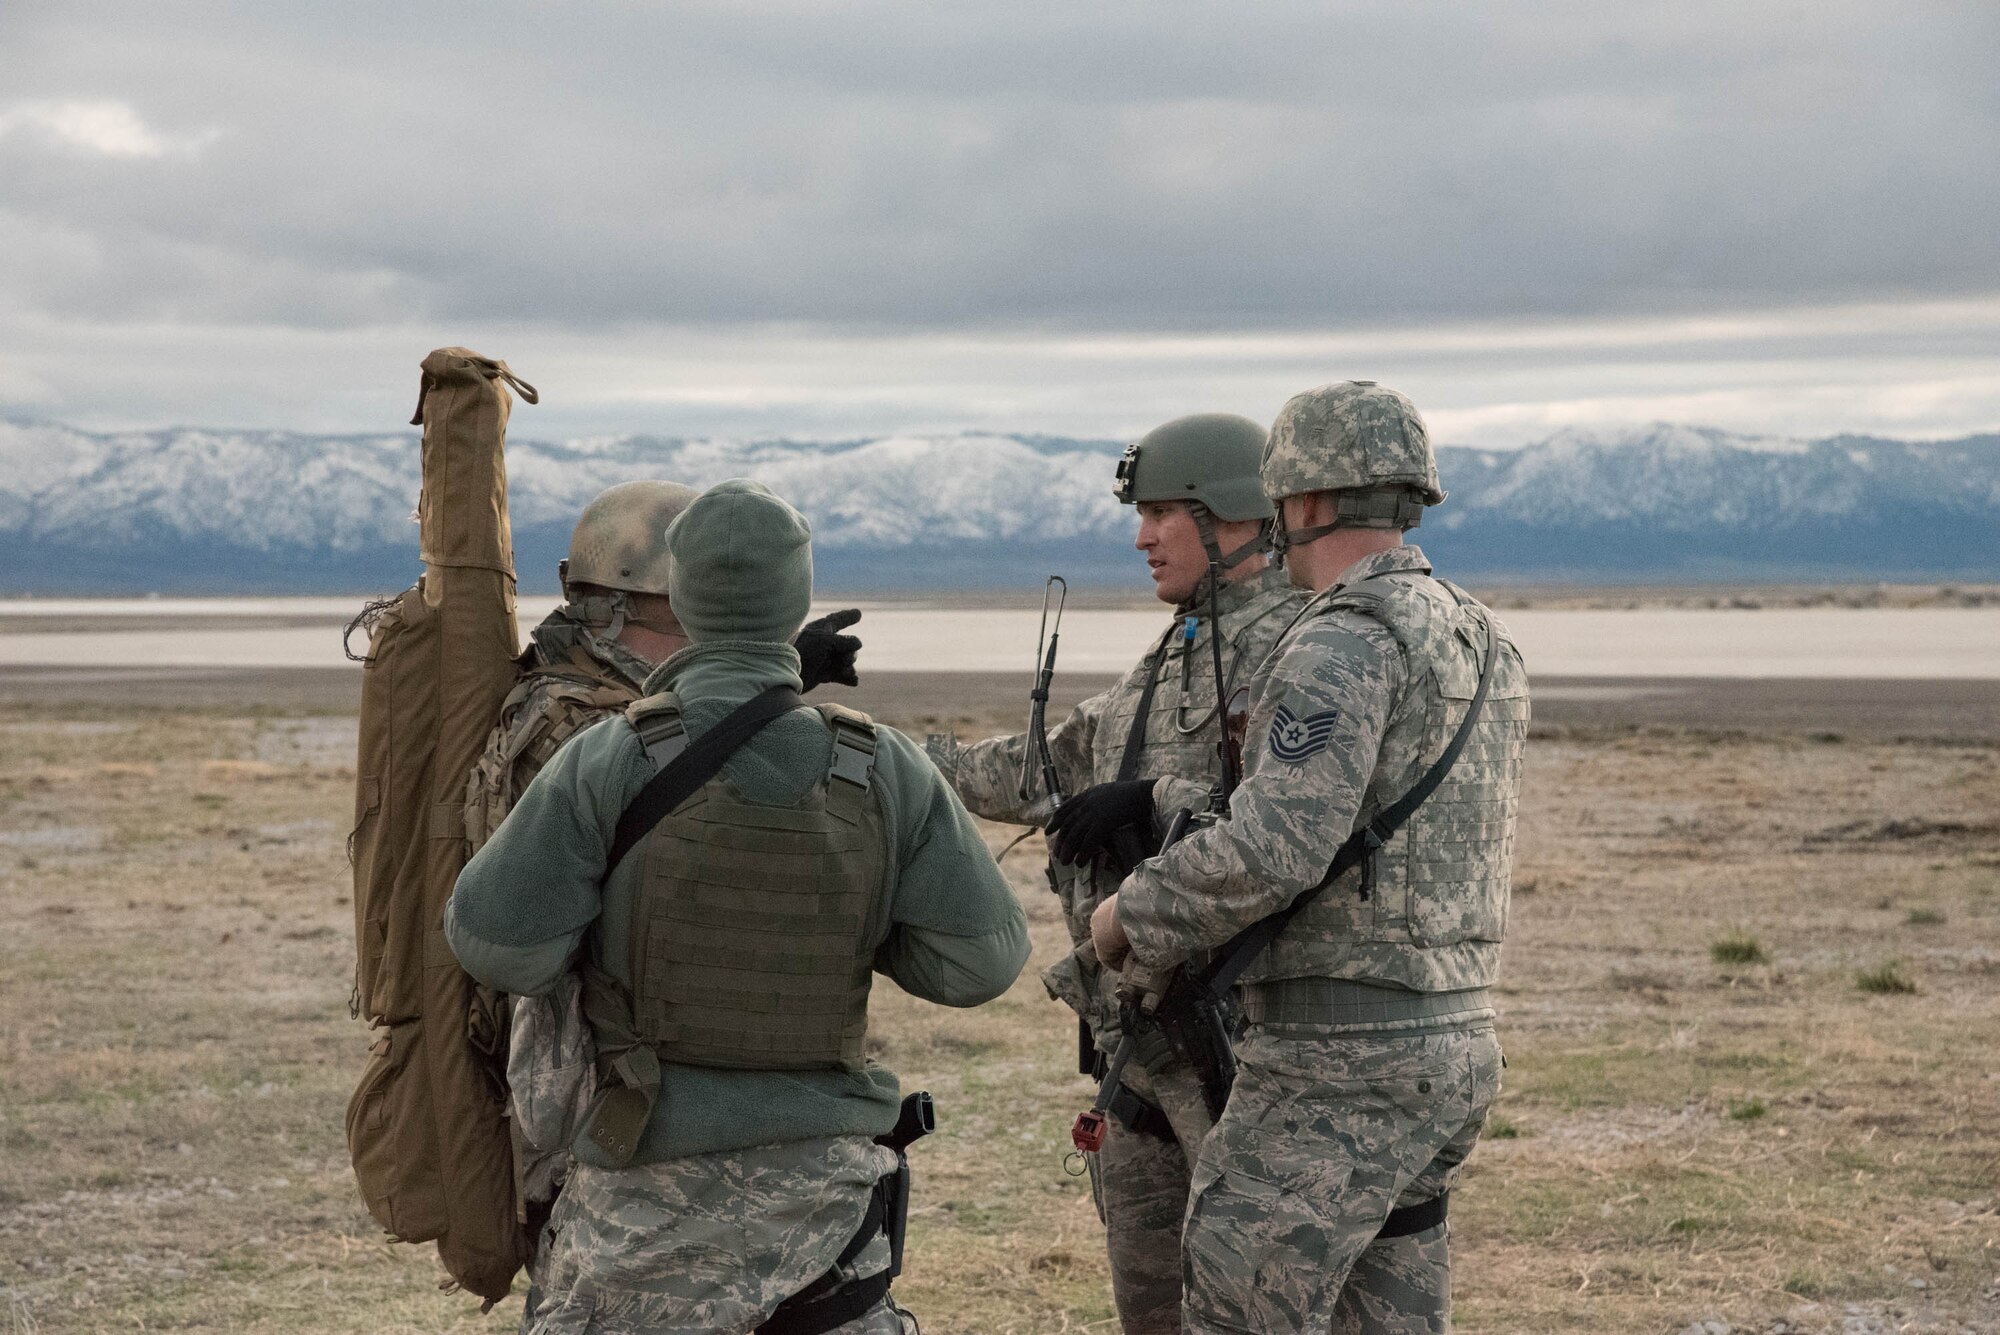 Airmen from the Kentucky Air National Guard’s 123rd Contingency Response Group discuss the security posture at Amedee Army Airfield, Calif., March 7, 2016. The 123rd CRG is working in conjunction with the U.S. Army’s 688th Rapid Port Opening Element and a team from the Defense Logistics Agency to operate Joint Task Force-Port Opening Sangala during a week-long exercise called Operation Lumberjack. The objective of the JTF-PO is to establish an aerial port of debarkation, provide initial distribution capability and set up warehousing for distribution beyond a forward node. (Kentucky Air National Guard photo by 1st Lt. James Killen)